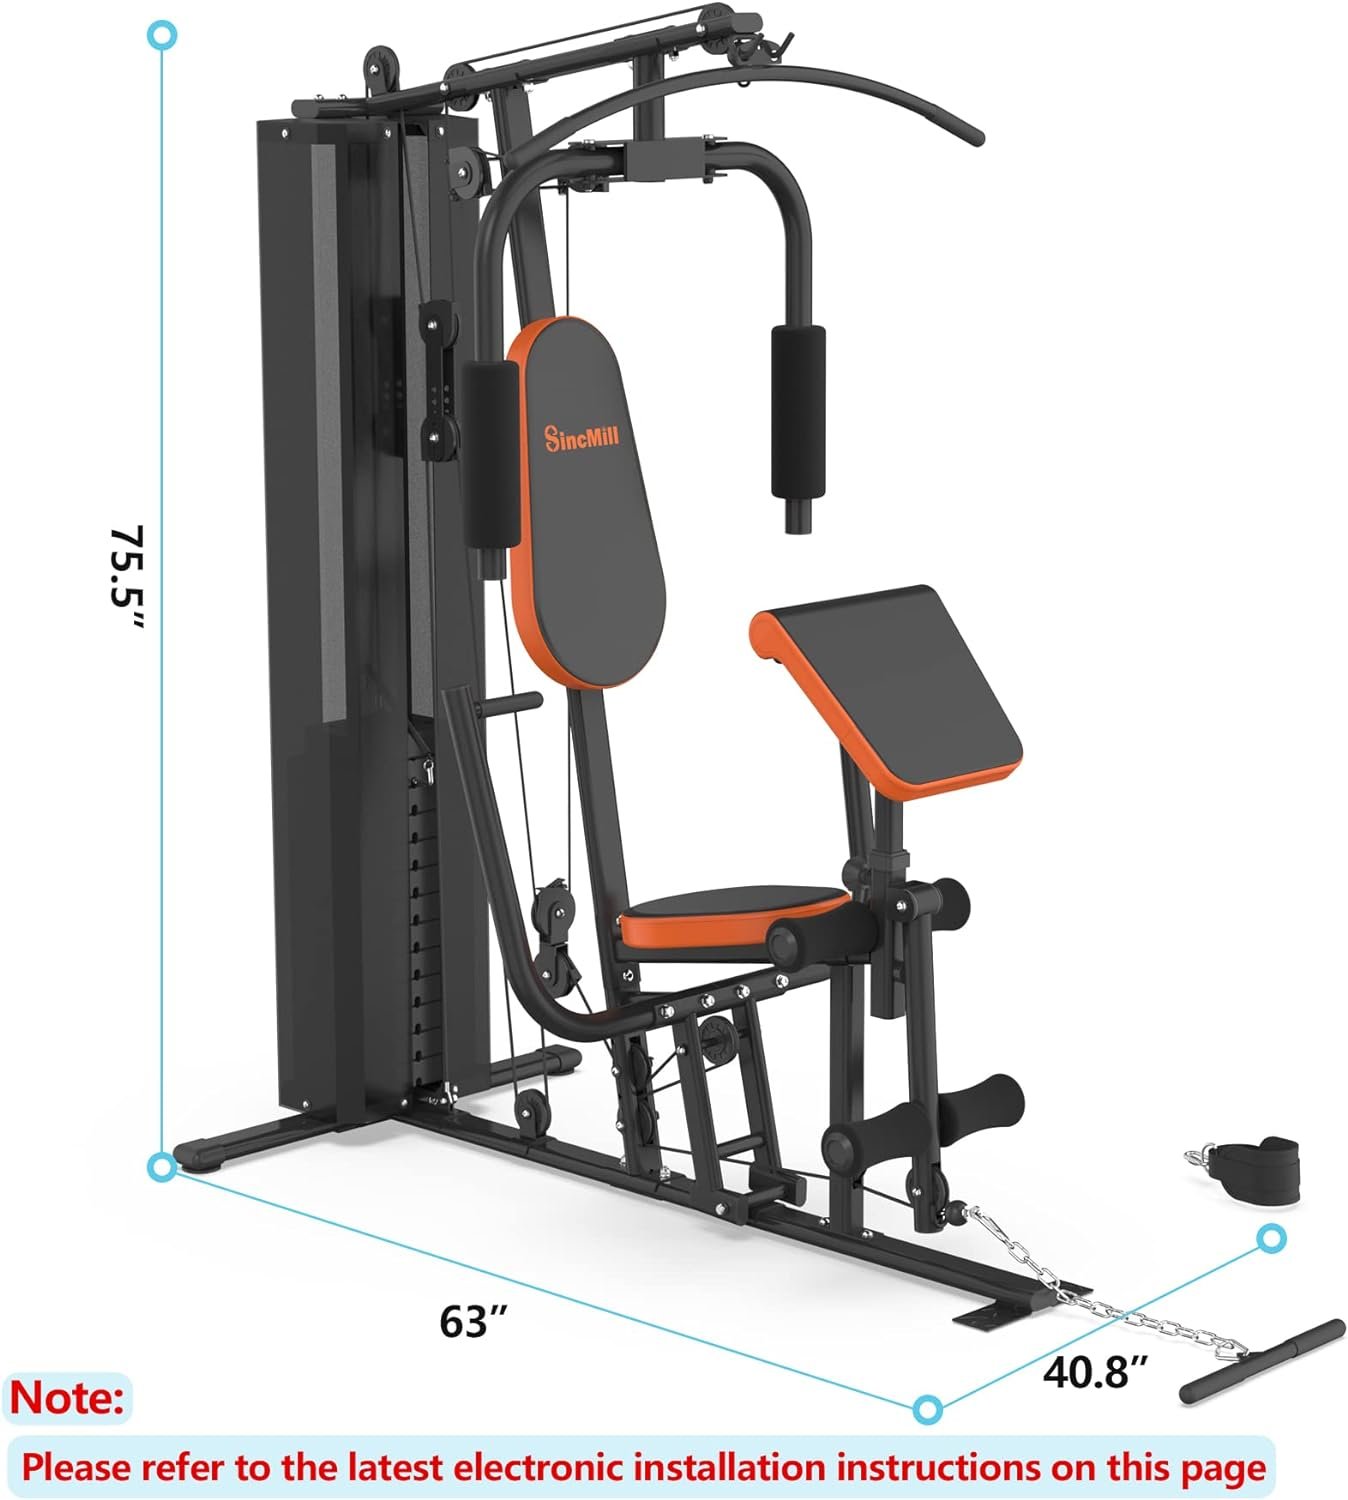 Home Gym Multifunctional Full Body Home Gym Equipment Review